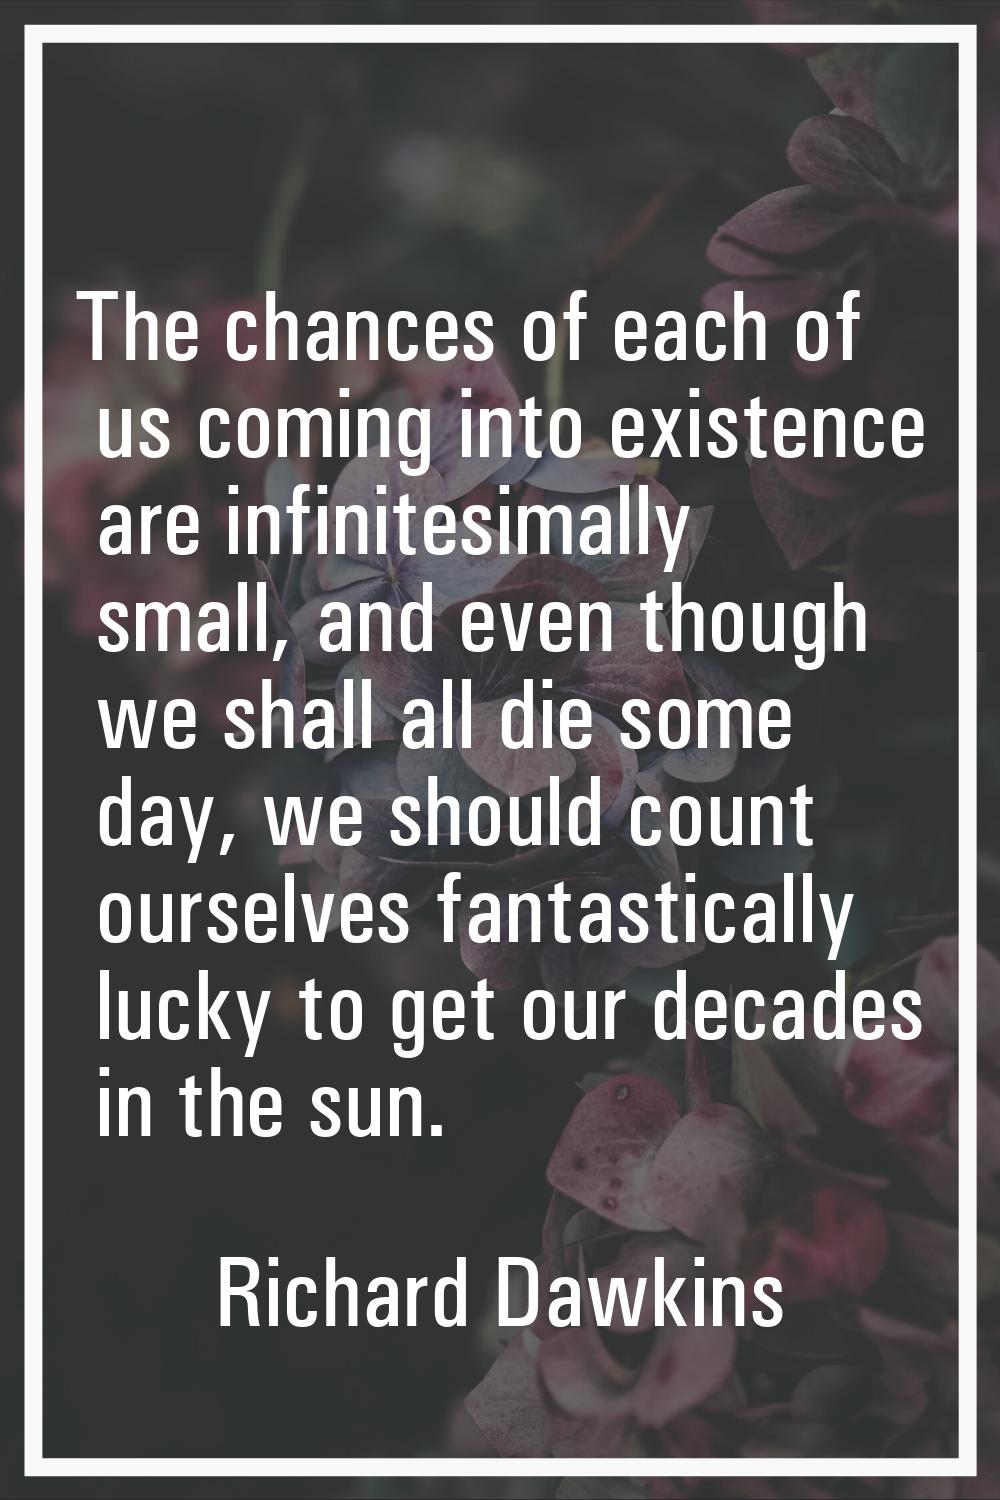 The chances of each of us coming into existence are infinitesimally small, and even though we shall